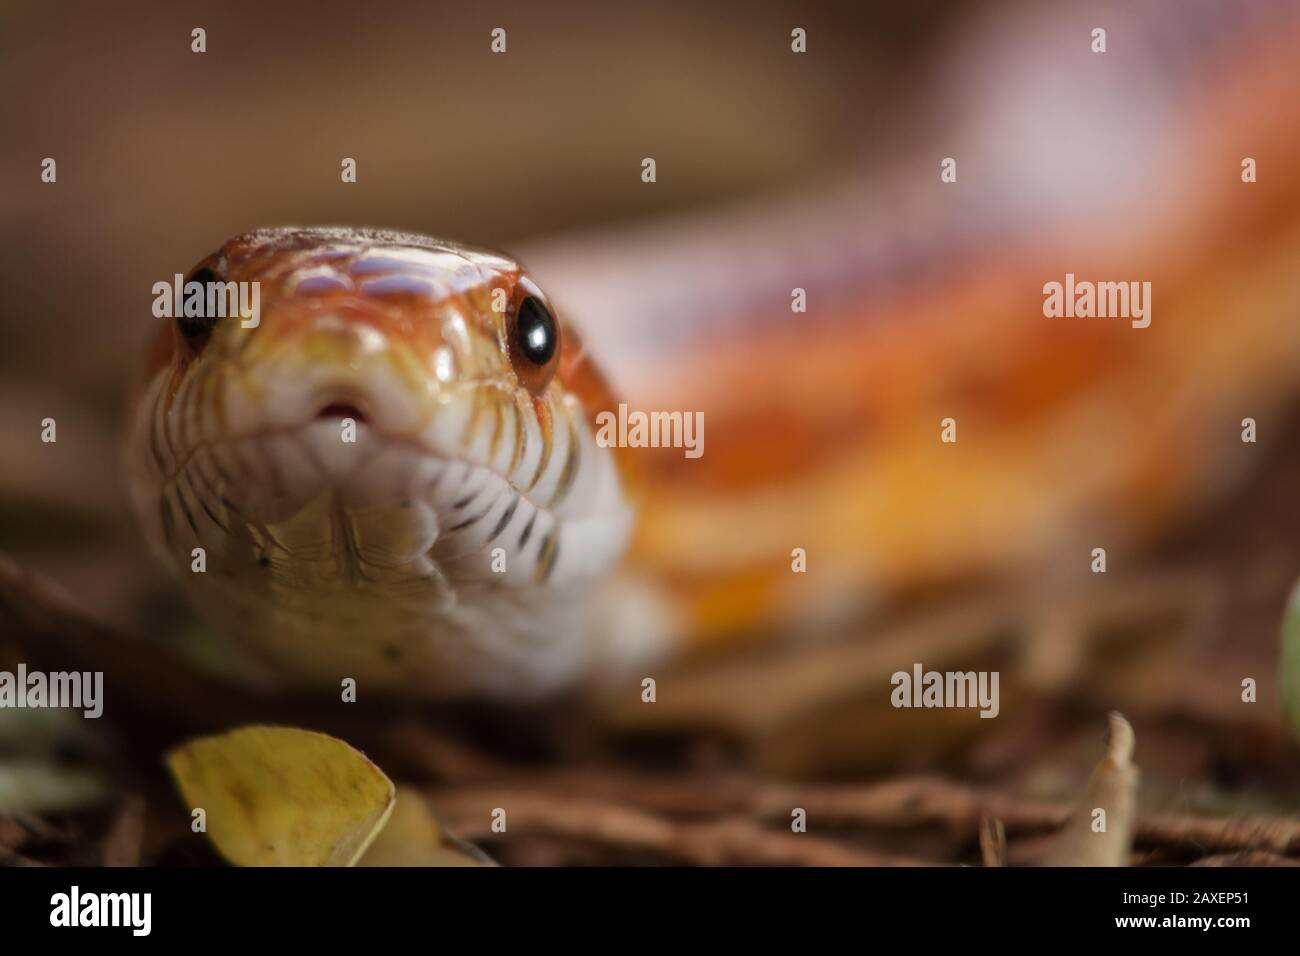 Classic corn snake outdoors slithering on grass, frontal close-up of the snake head Stock Photo